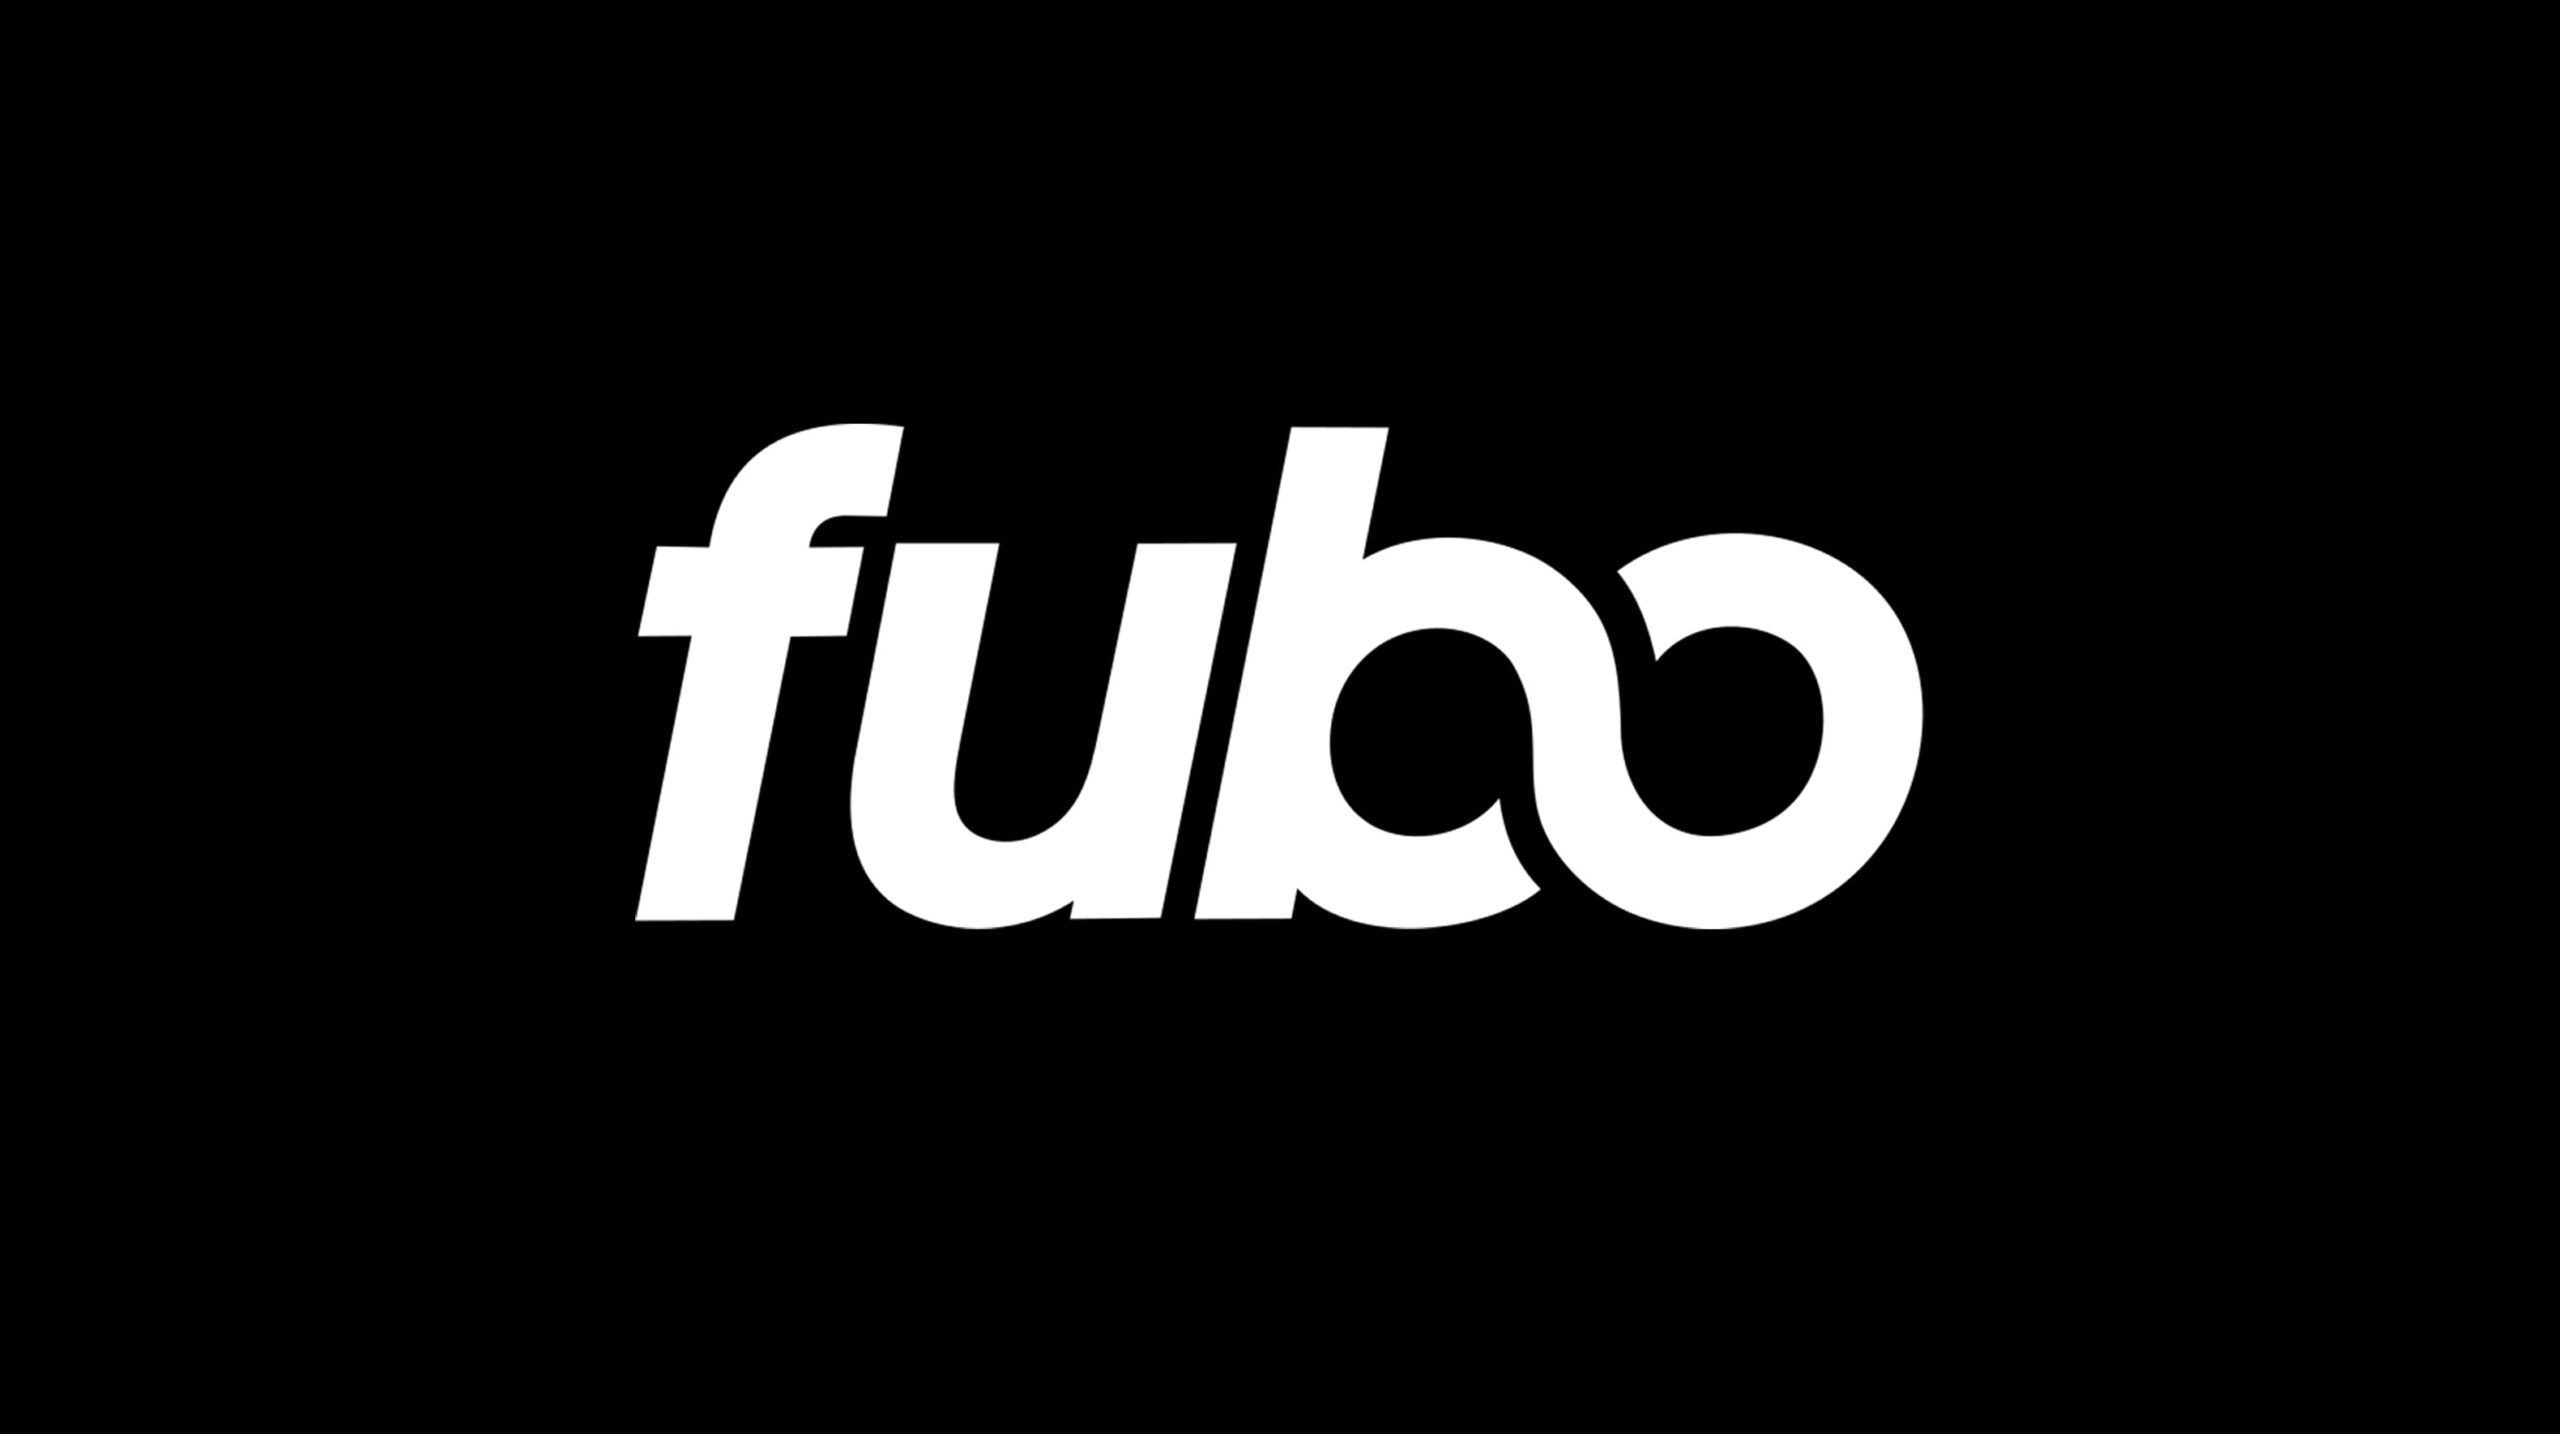 Fubo launches two-month special offer in Canada - MobileSyrup